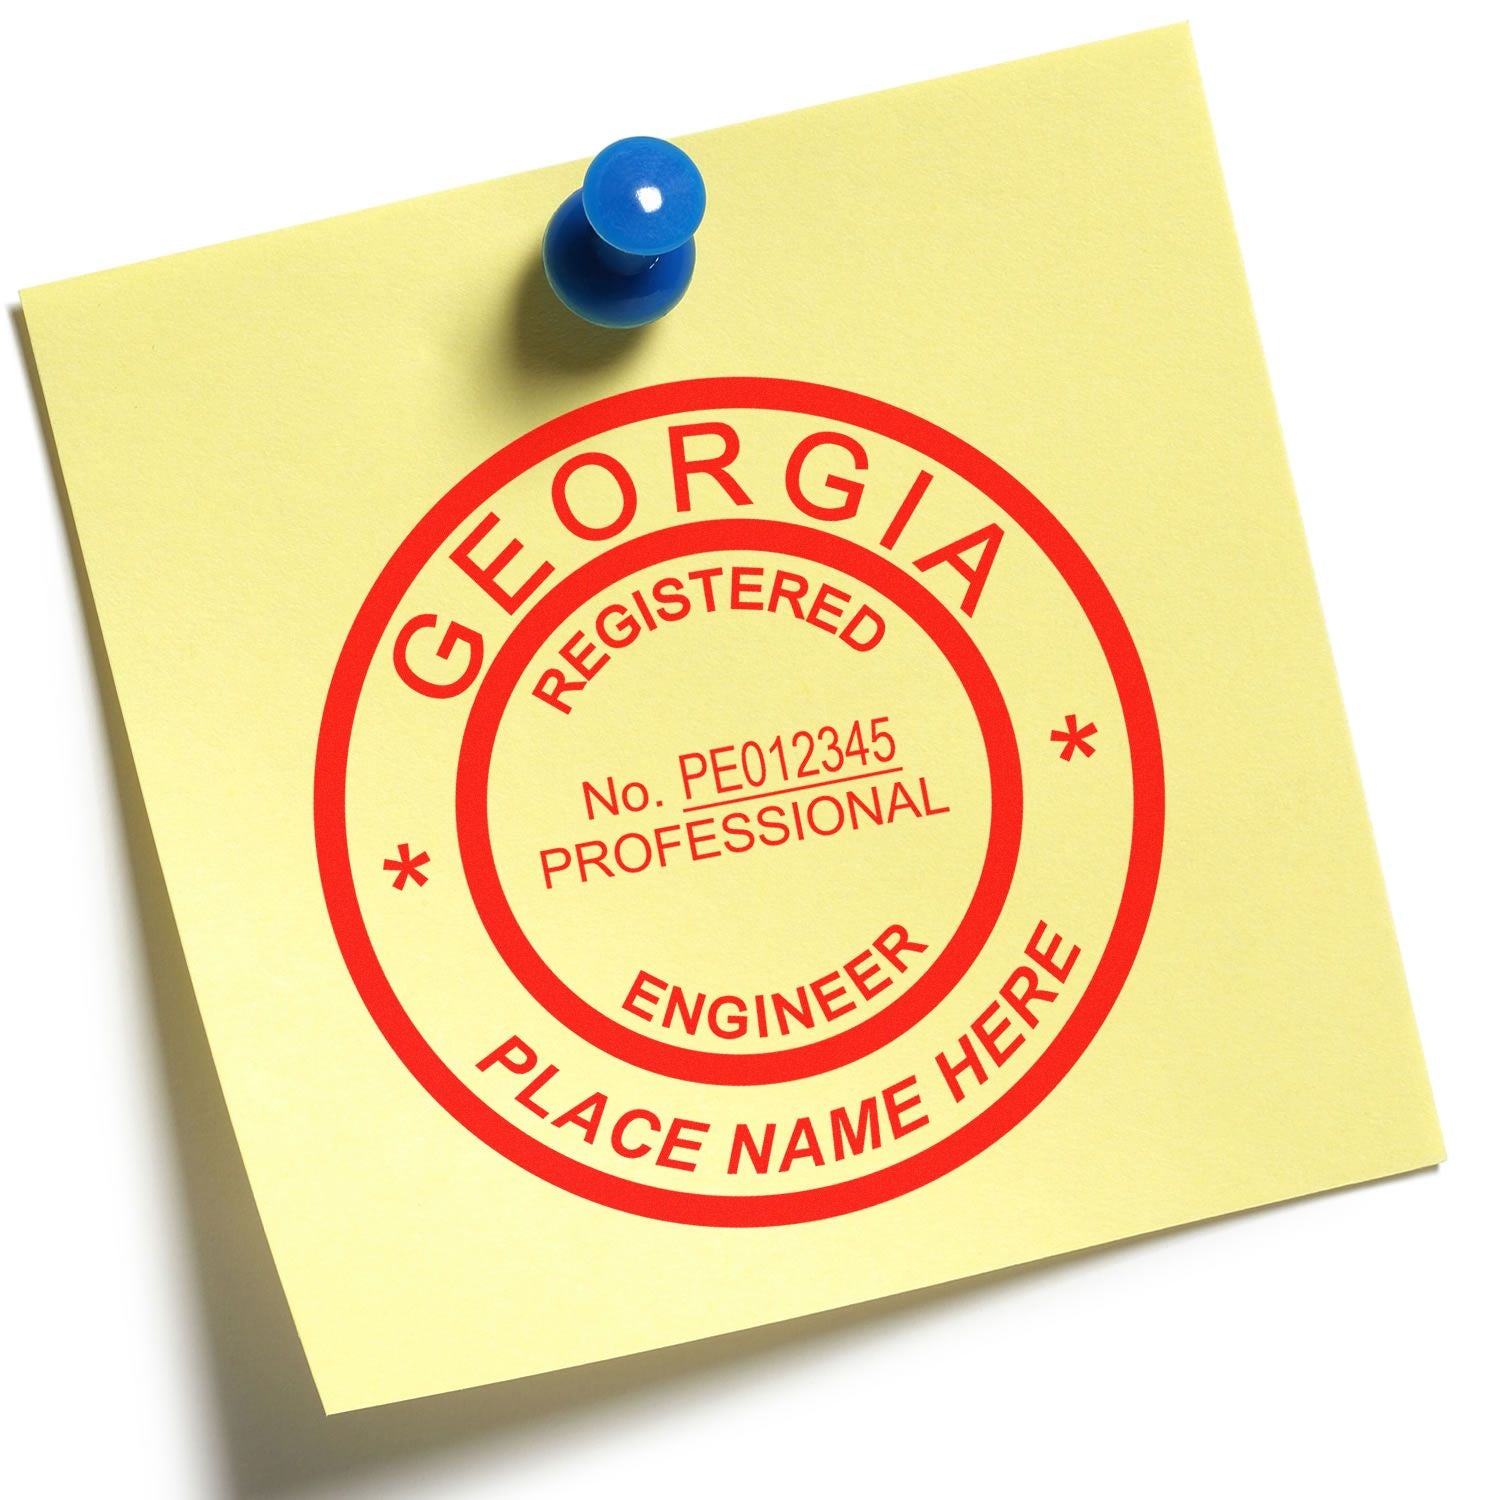 The main image for the Georgia Professional Engineer Seal Stamp depicting a sample of the imprint and electronic files